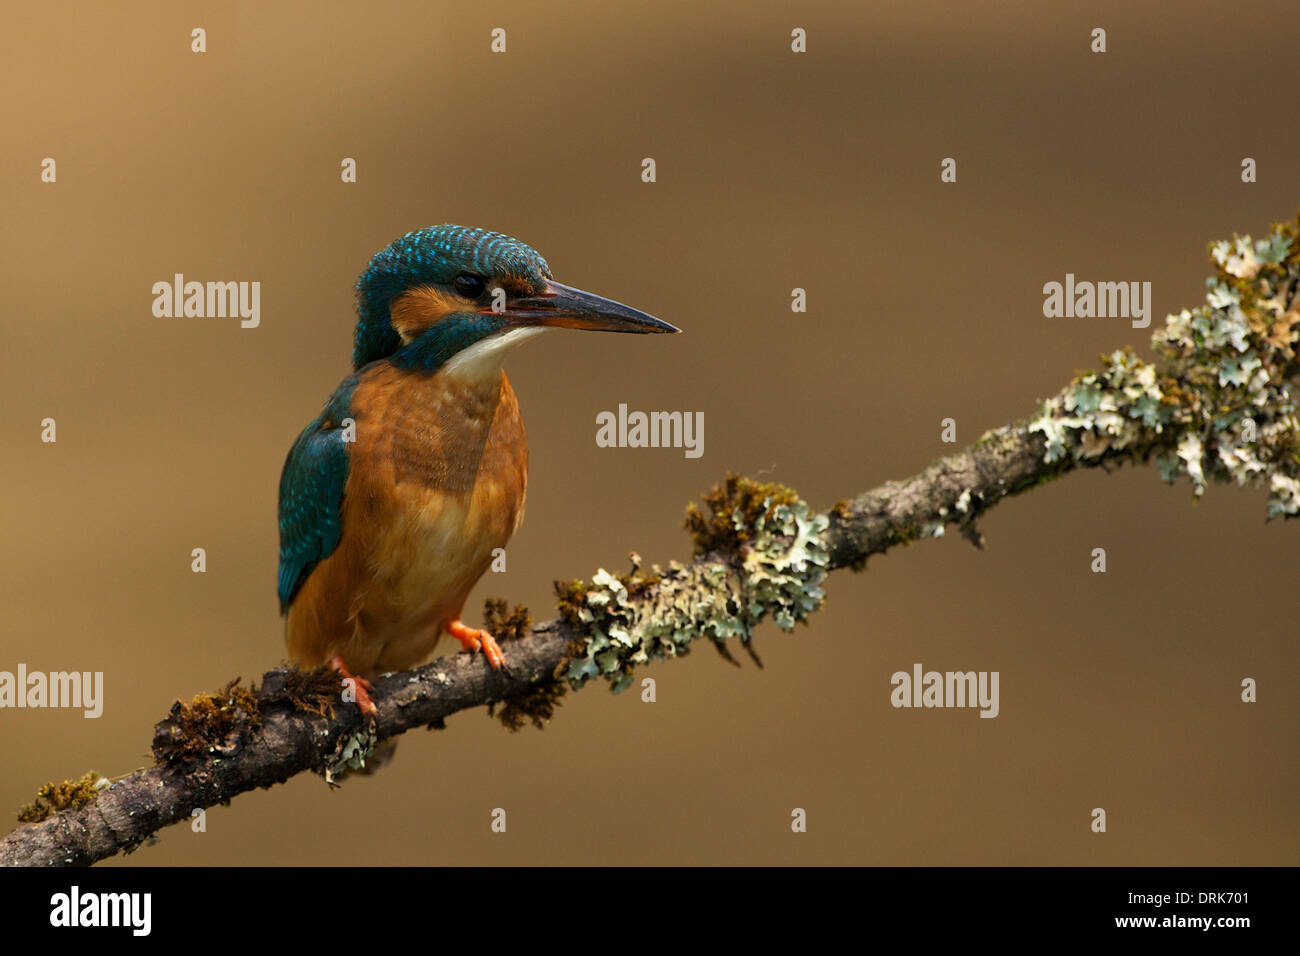 Kingfisher on lichen covered perch 2 ©Jake Stephen Photography. Stock Photo